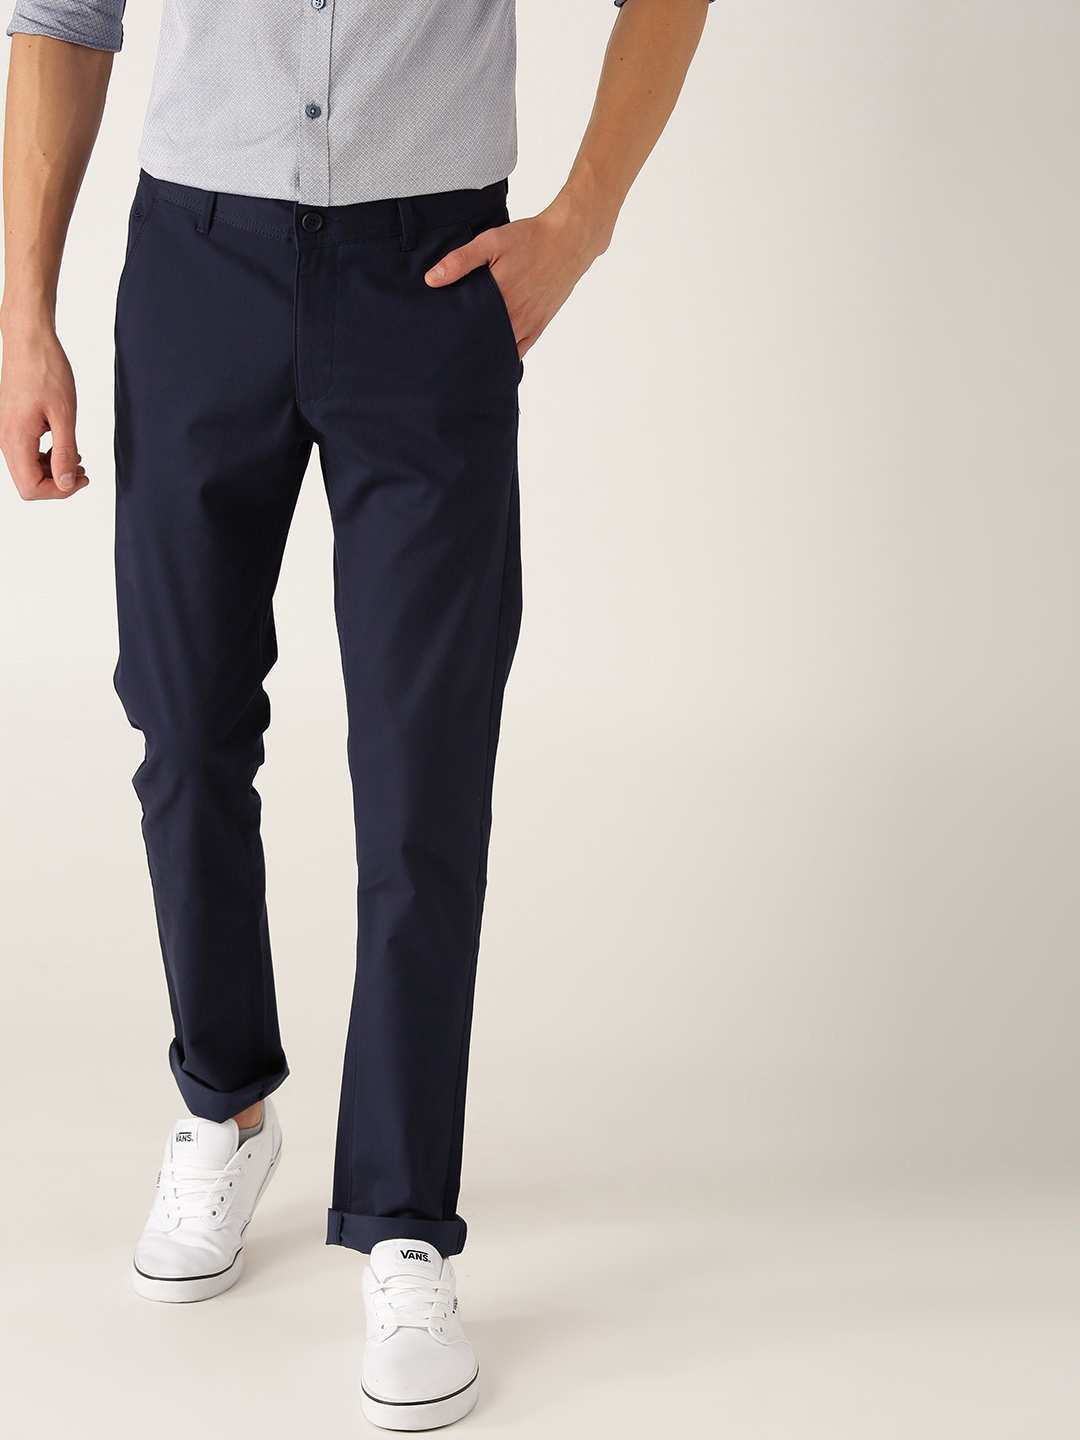 Buy United Colors Of Benetton Men Navy Blue Slim Fit Solid Chinos ...